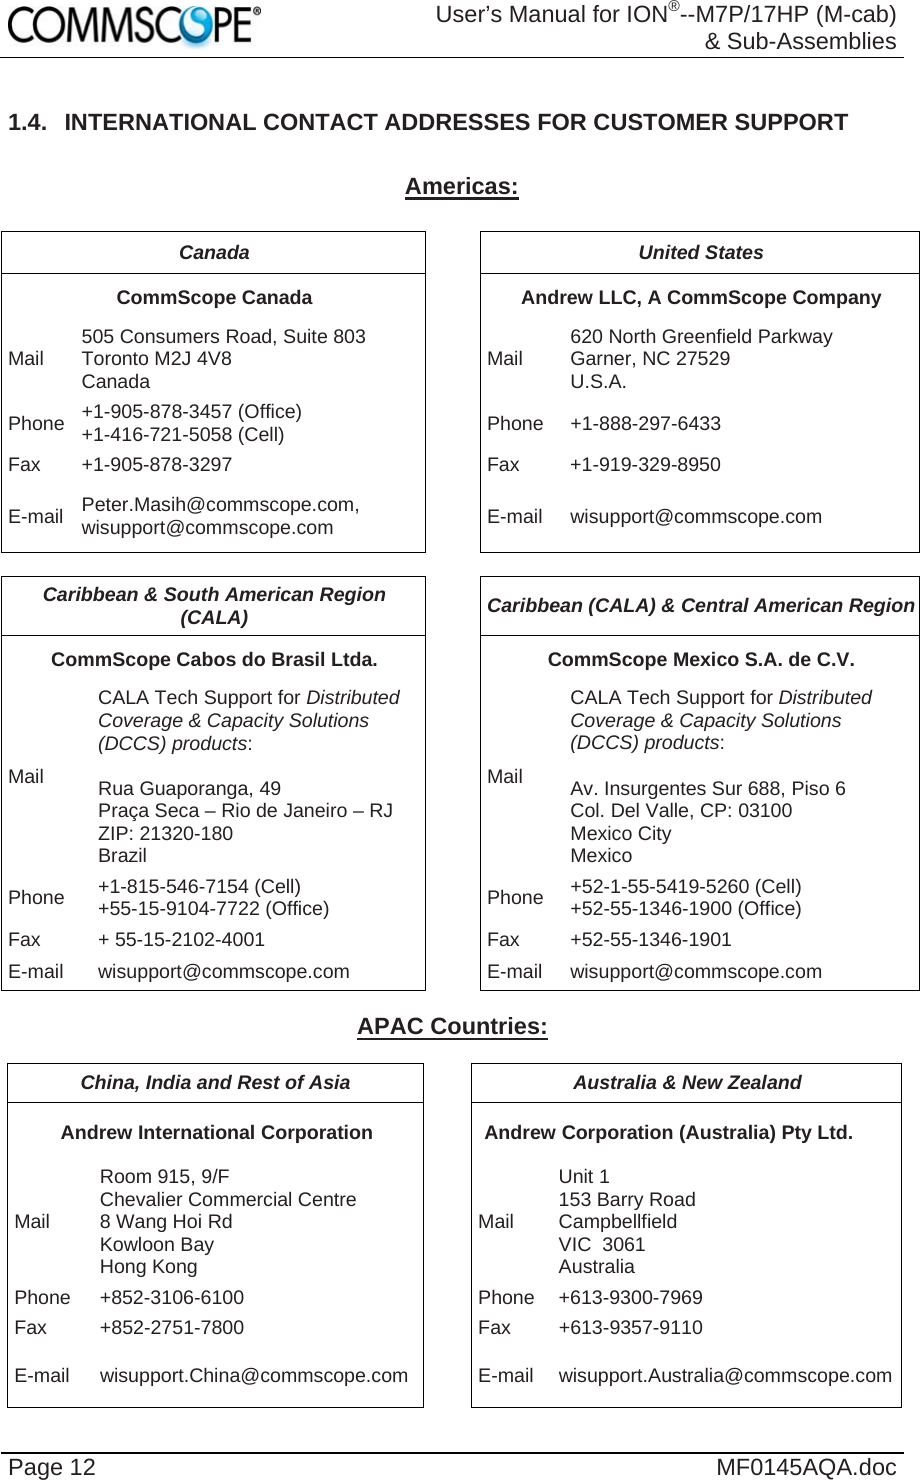  User’s Manual for ION®--M7P/17HP (M-cab) &amp; Sub-Assemblies Page 12  MF0145AQA.doc 1.4.  INTERNATIONAL CONTACT ADDRESSES FOR CUSTOMER SUPPORT  Americas:  Canada  United States CommScope Canada  Andrew LLC, A CommScope Company Mail  505 Consumers Road, Suite 803  Toronto M2J 4V8  Canada  Mail  620 North Greenfield Parkway Garner, NC 27529 U.S.A. Phone  +1-905-878-3457 (Office) +1-416-721-5058 (Cell) Phone +1-888-297-6433 Fax +1-905-878-3297  Fax  +1-919-329-8950 E-mail  Peter.Masih@commscope.com, wisupport@commscope.com  E-mail wisupport@commscope.com  Caribbean &amp; South American Region (CALA)  Caribbean (CALA) &amp; Central American Region CommScope Cabos do Brasil Ltda.  CommScope Mexico S.A. de C.V. Mail CALA Tech Support for Distributed Coverage &amp; Capacity Solutions (DCCS) products:  Rua Guaporanga, 49 Praça Seca – Rio de Janeiro – RJ ZIP: 21320-180 Brazil Mail CALA Tech Support for Distributed Coverage &amp; Capacity Solutions (DCCS) products:  Av. Insurgentes Sur 688, Piso 6 Col. Del Valle, CP: 03100 Mexico City Mexico Phone  +1-815-546-7154 (Cell) +55-15-9104-7722 (Office)  Phone  +52-1-55-5419-5260 (Cell) +52-55-1346-1900 (Office) Fax + 55-15-2102-4001  Fax +52-55-1346-1901 E-mail wisupport@commscope.com  E-mail wisupport@commscope.com  APAC Countries:  China, India and Rest of Asia  Australia &amp; New Zealand Andrew International Corporation  Andrew Corporation (Australia) Pty Ltd. Mail Room 915, 9/F  Chevalier Commercial Centre 8 Wang Hoi Rd Kowloon Bay  Hong Kong Mail Unit 1 153 Barry Road Campbellfield  VIC  3061 Australia Phone +852-3106-6100  Phone +613-9300-7969Fax +852-2751-7800  Fax +613-9357-9110 E-mail wisupport.China@commscope.com E-mail wisupport.Australia@commscope.com 